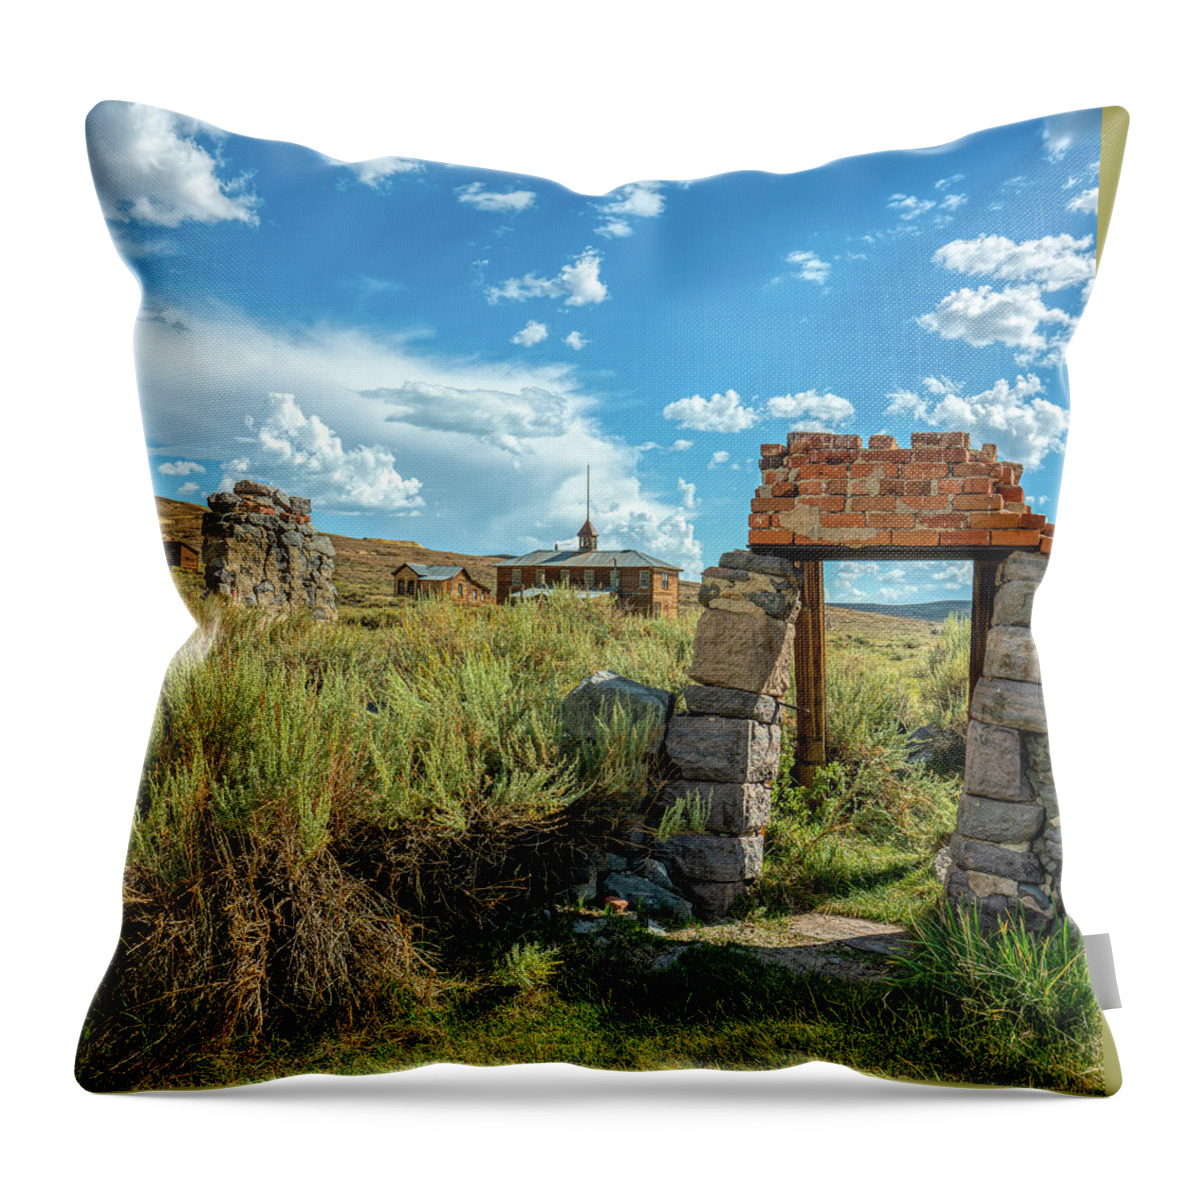 Ghost Town Throw Pillow featuring the photograph Ruined Future by Ron Long Ltd Photography